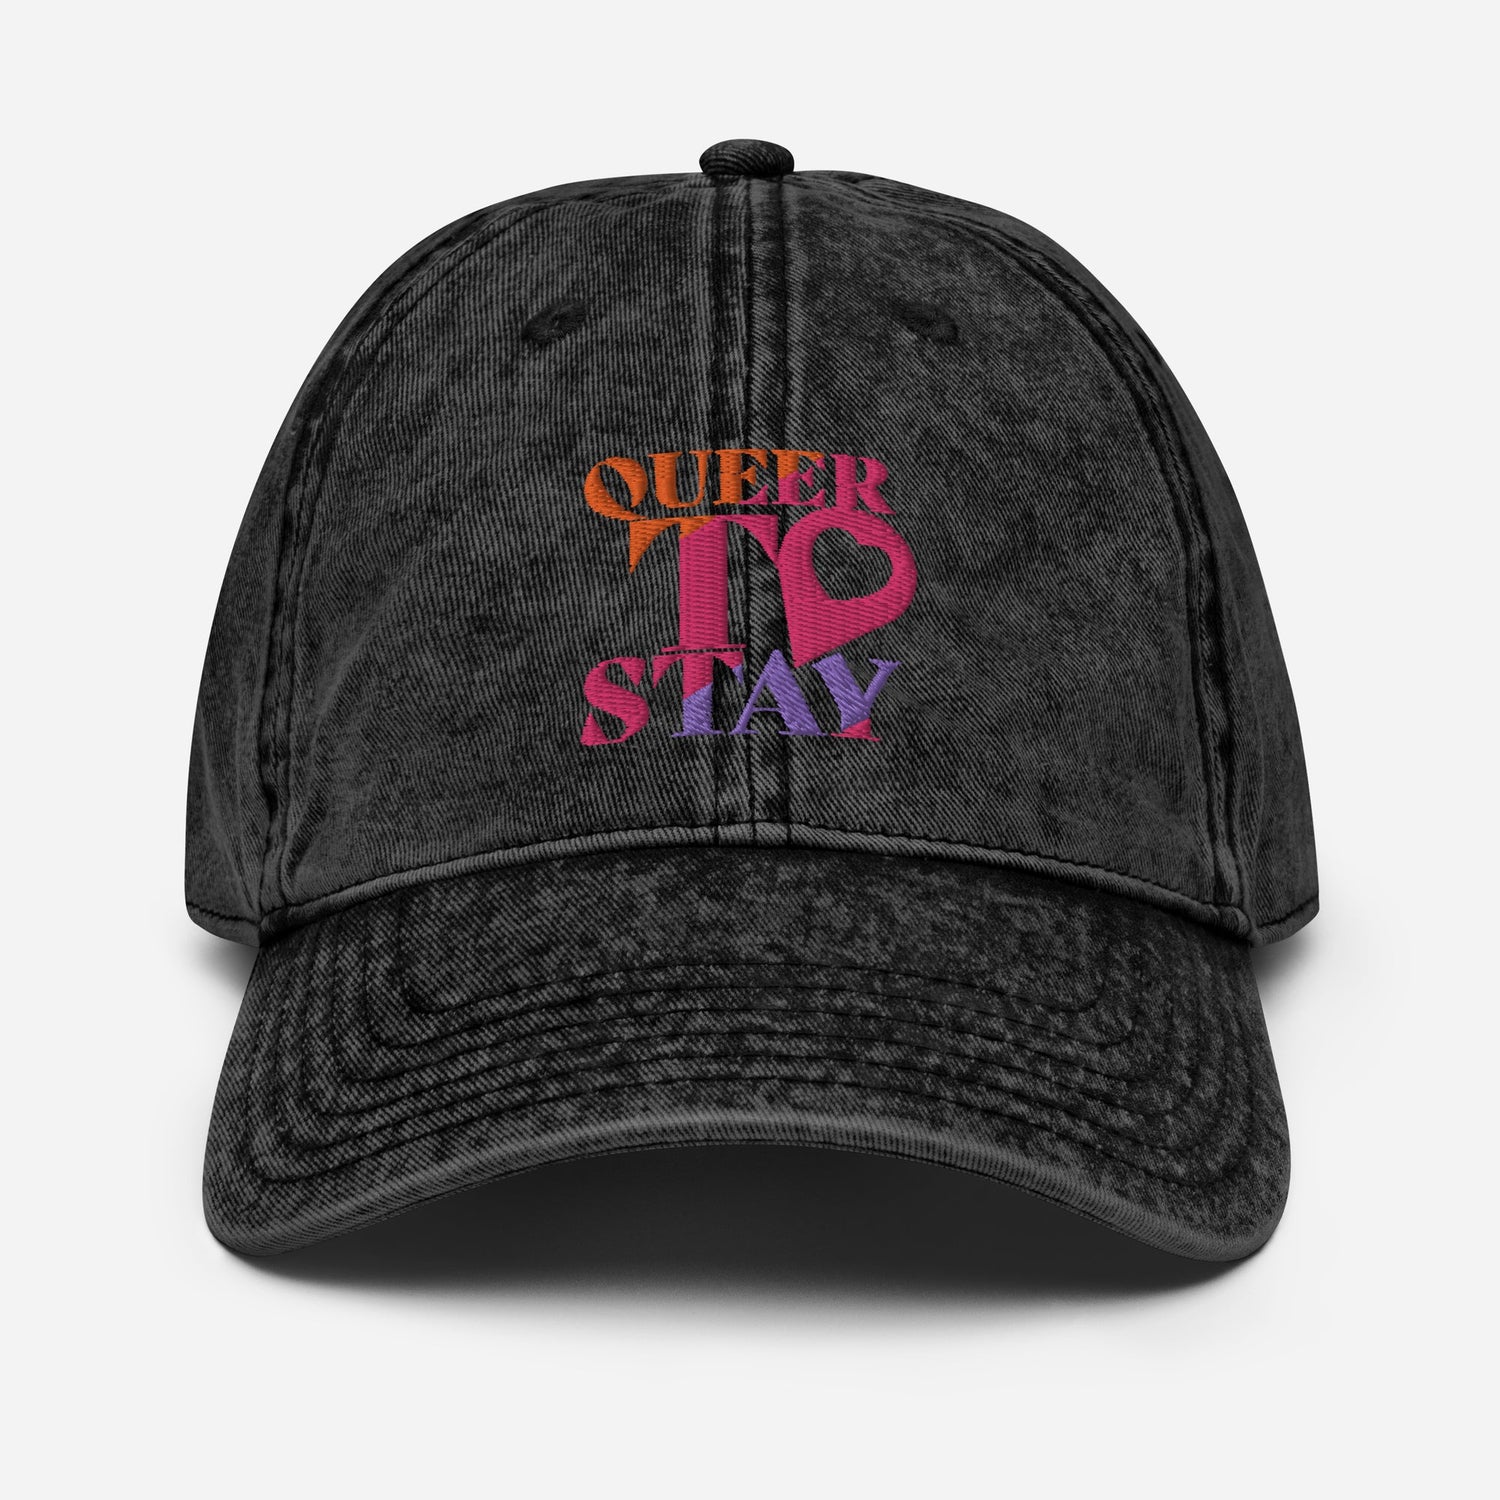 Showtime Queer To Stay Vintage Cap - Paramount Shop